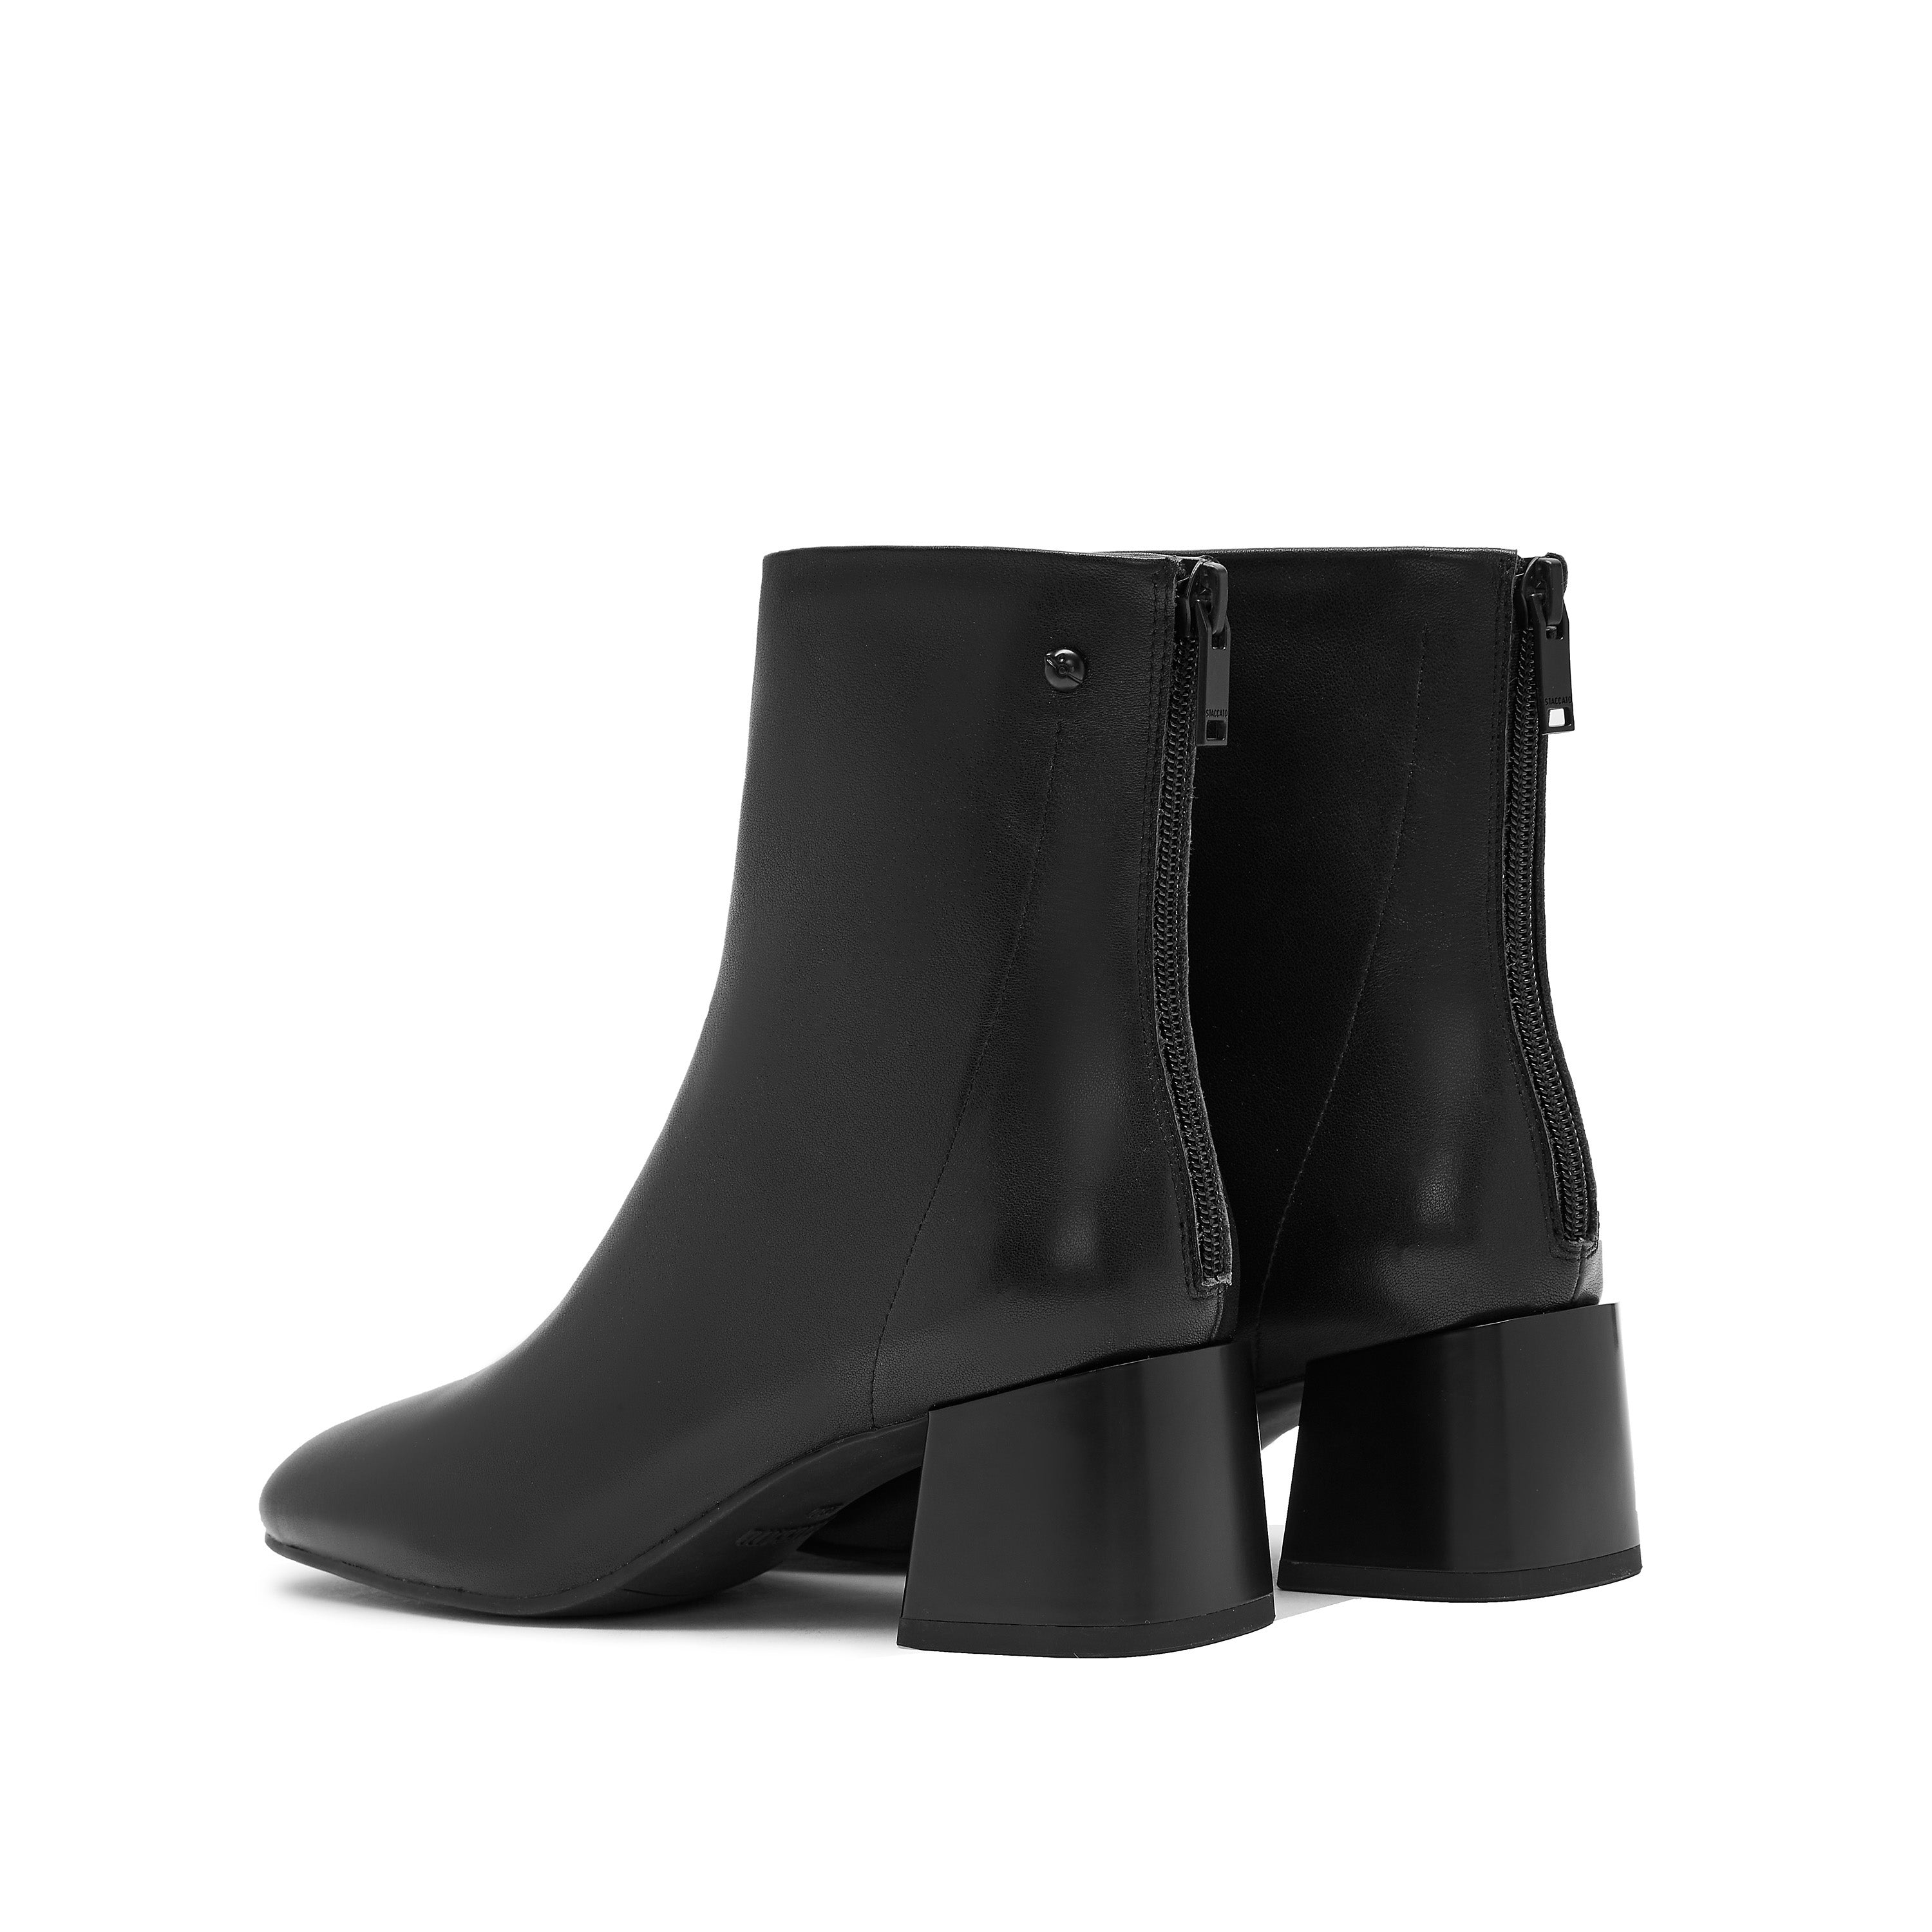 Black Round Toe Leather Ankle Boots